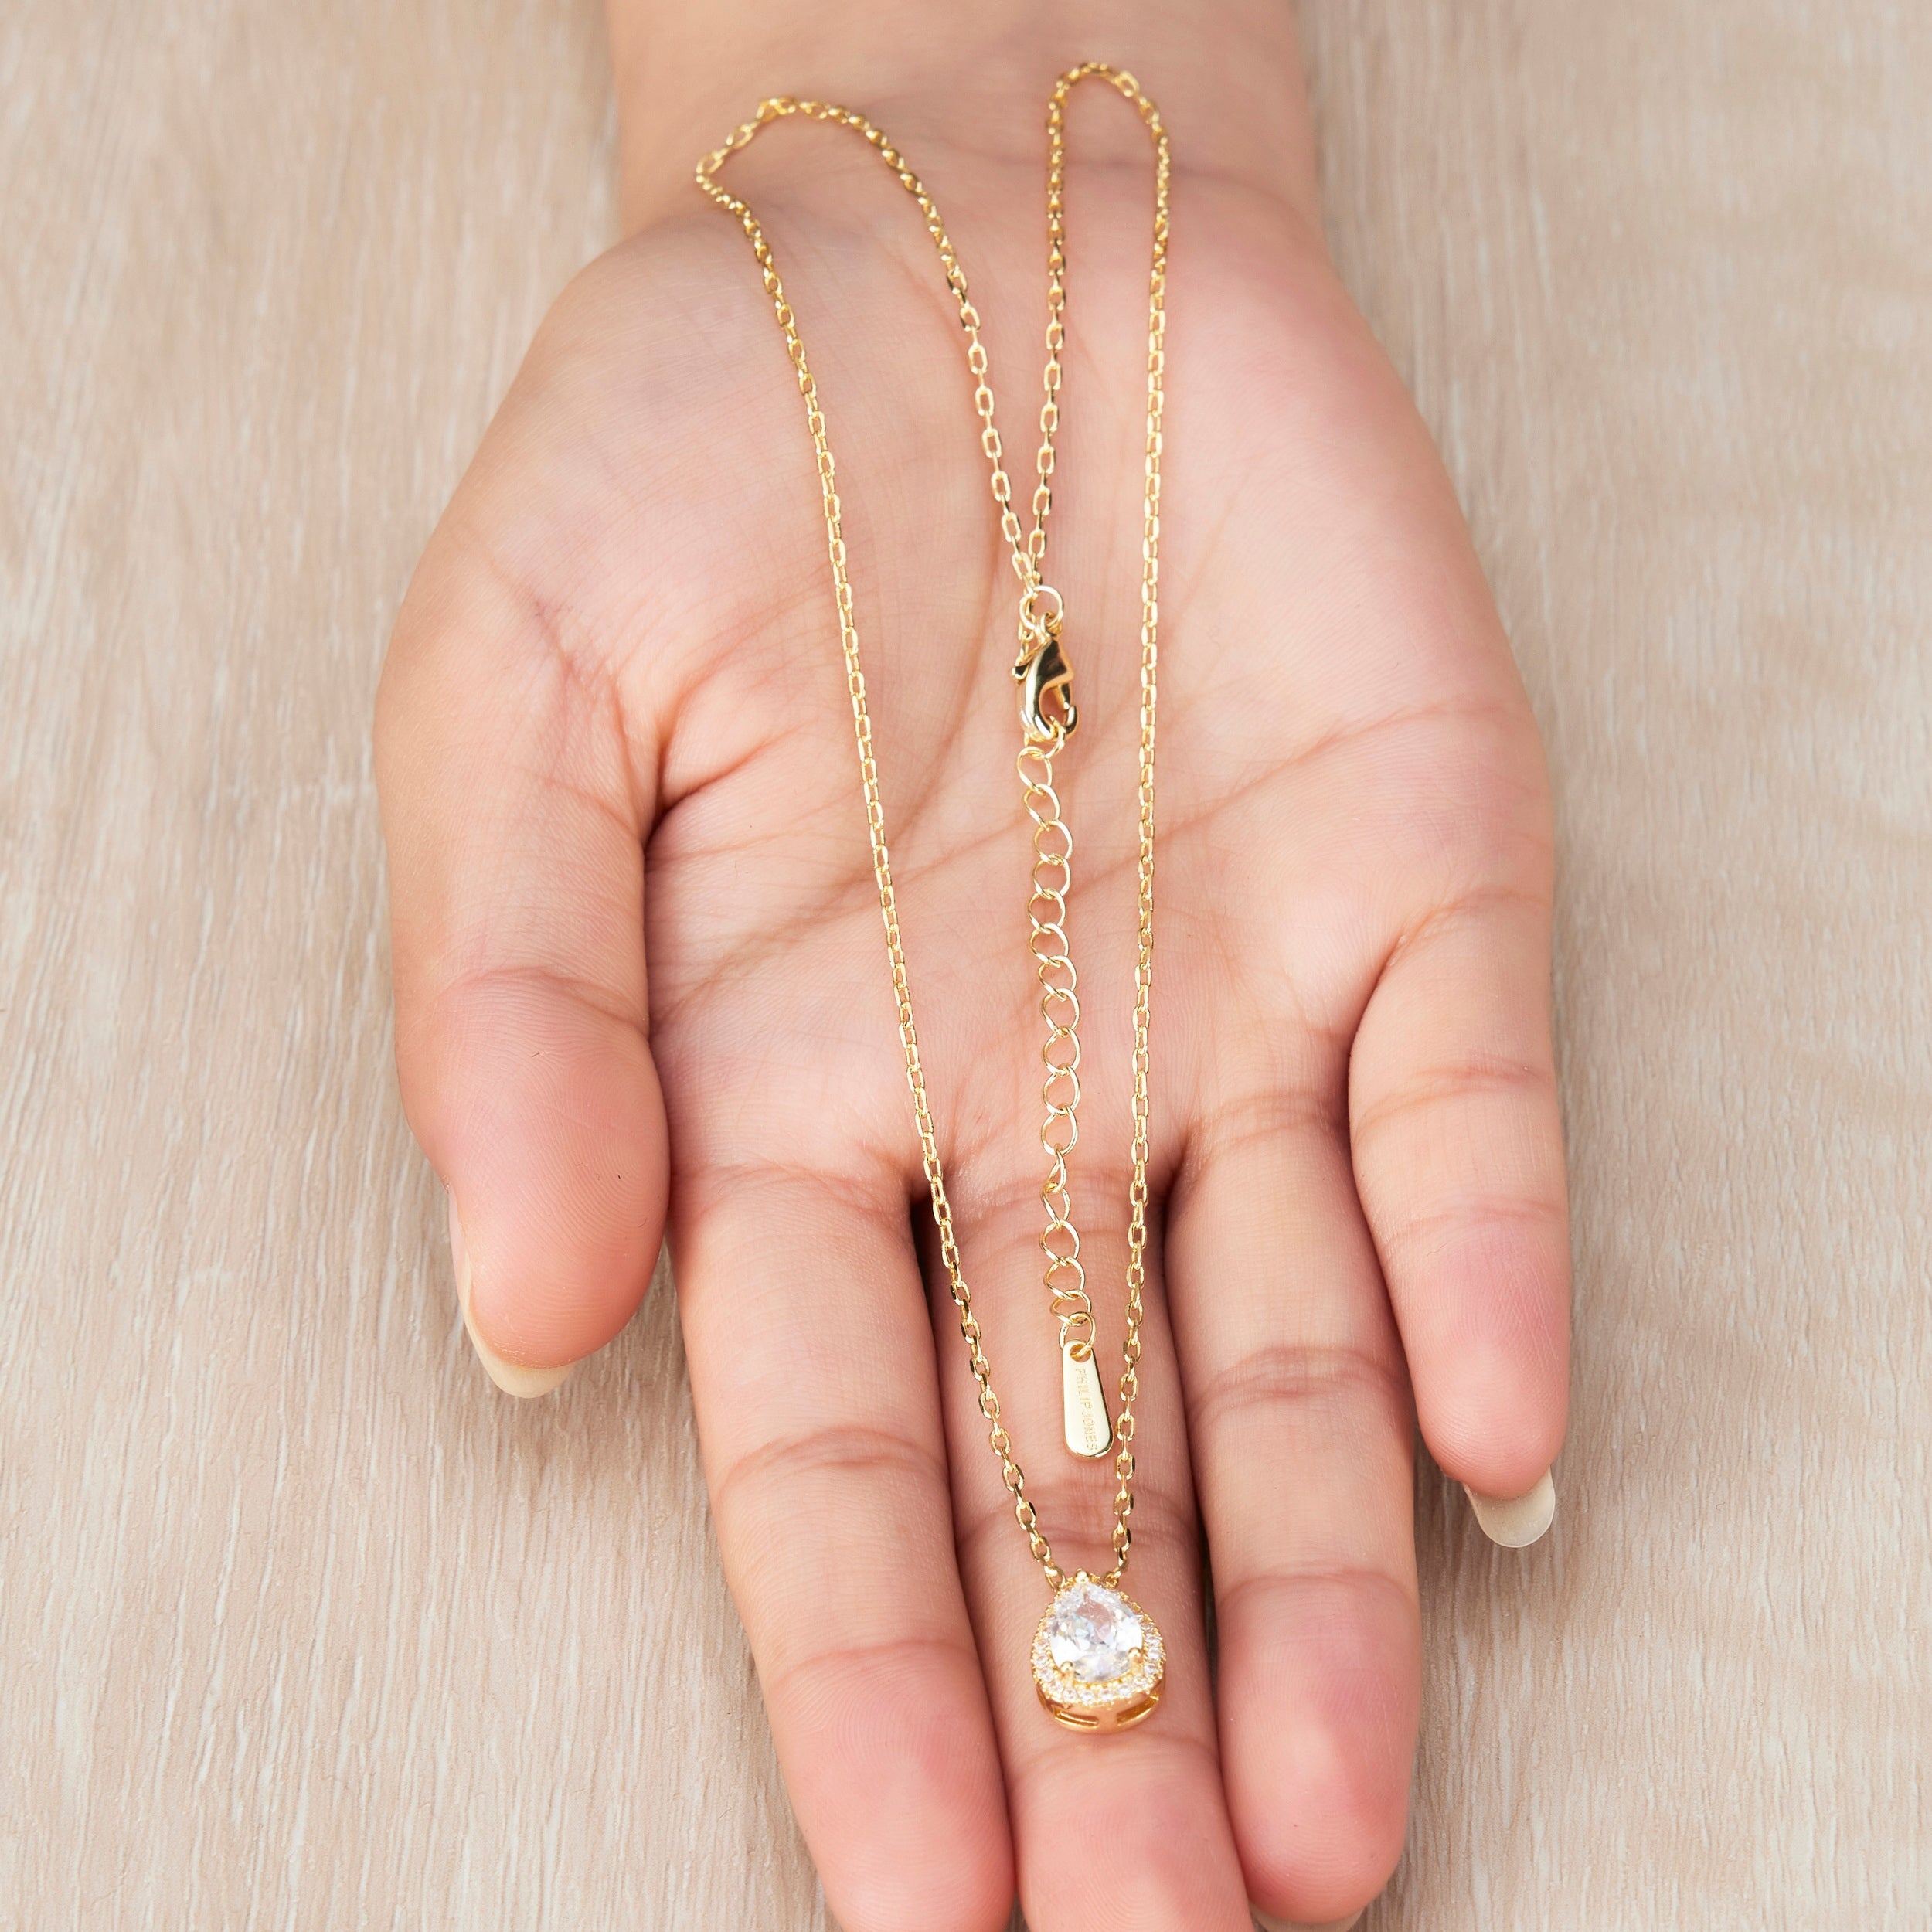 Gold Plated Pear Halo Necklace Created with Zircondia® Crystals